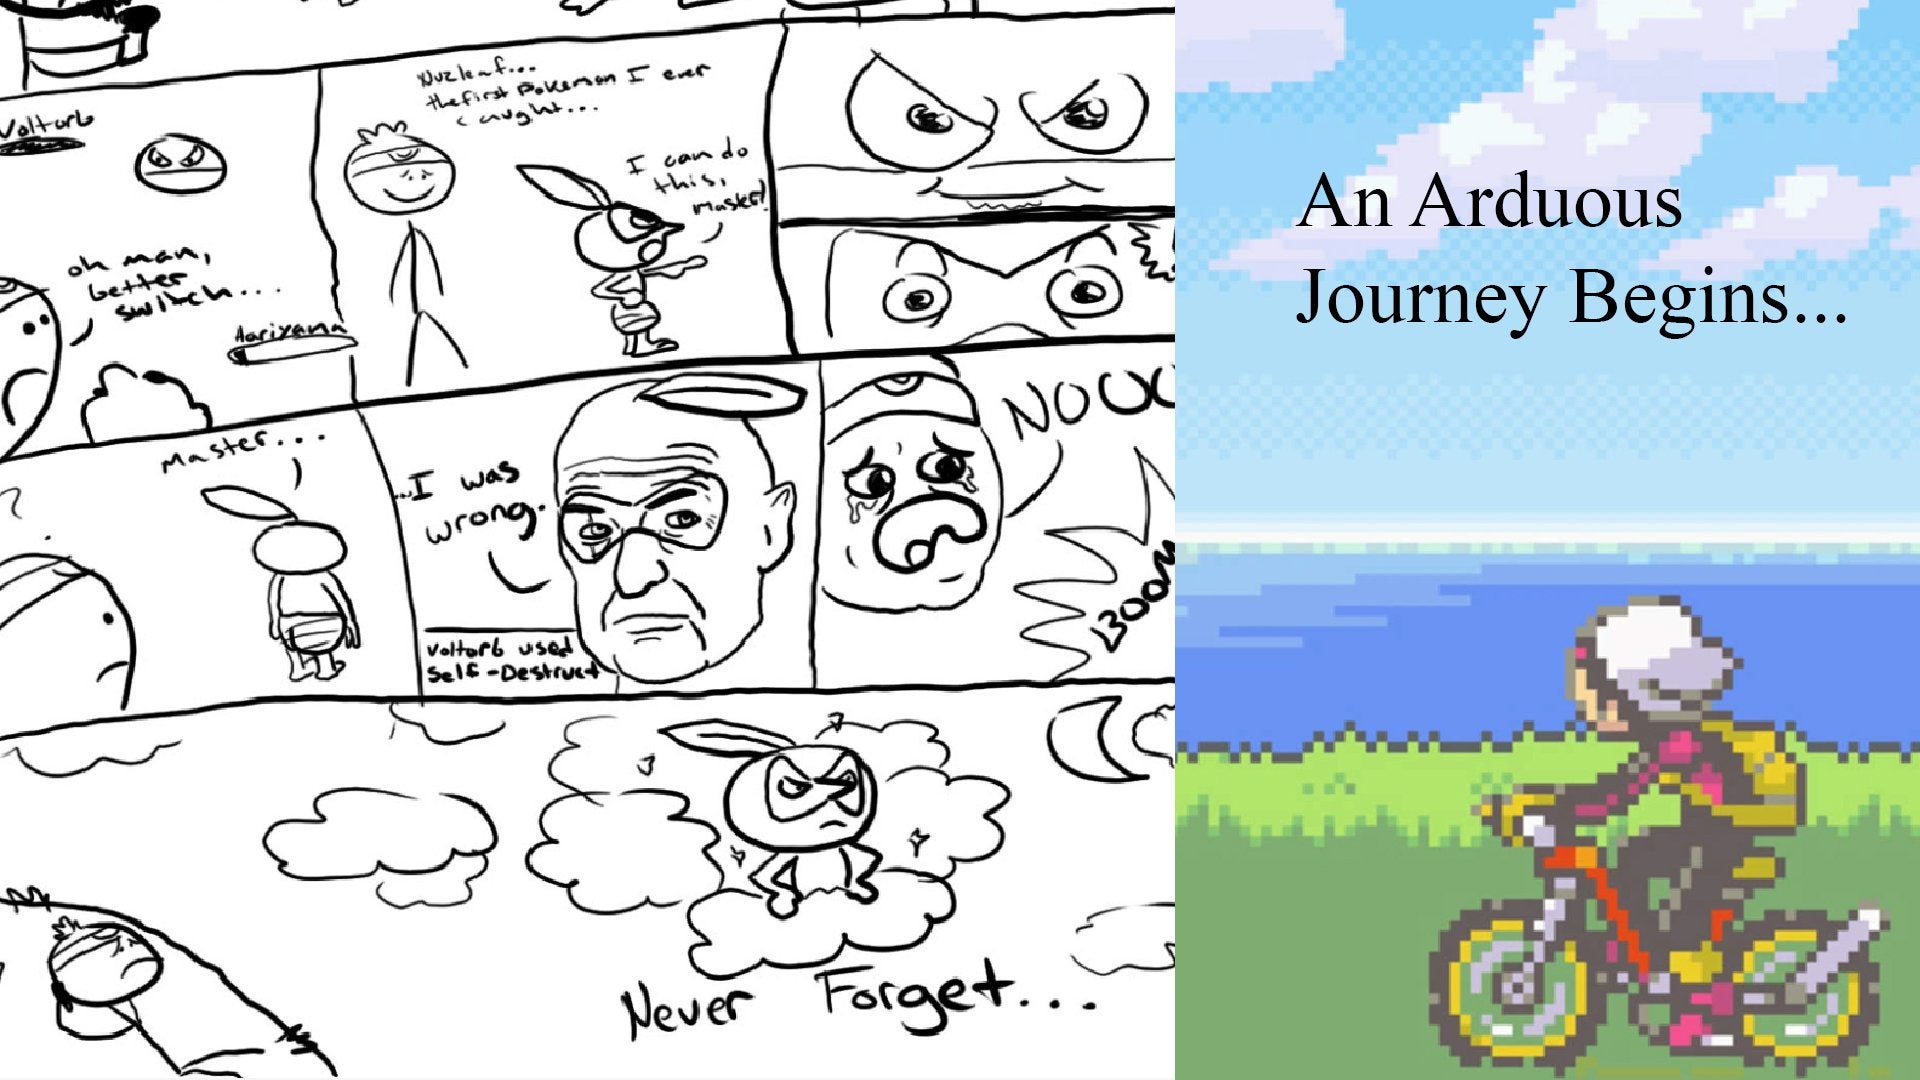 A few panels from the Hard-Mode Nuzlocke comic series next to a the player in Pokémon Ruby riding on a bicycle.